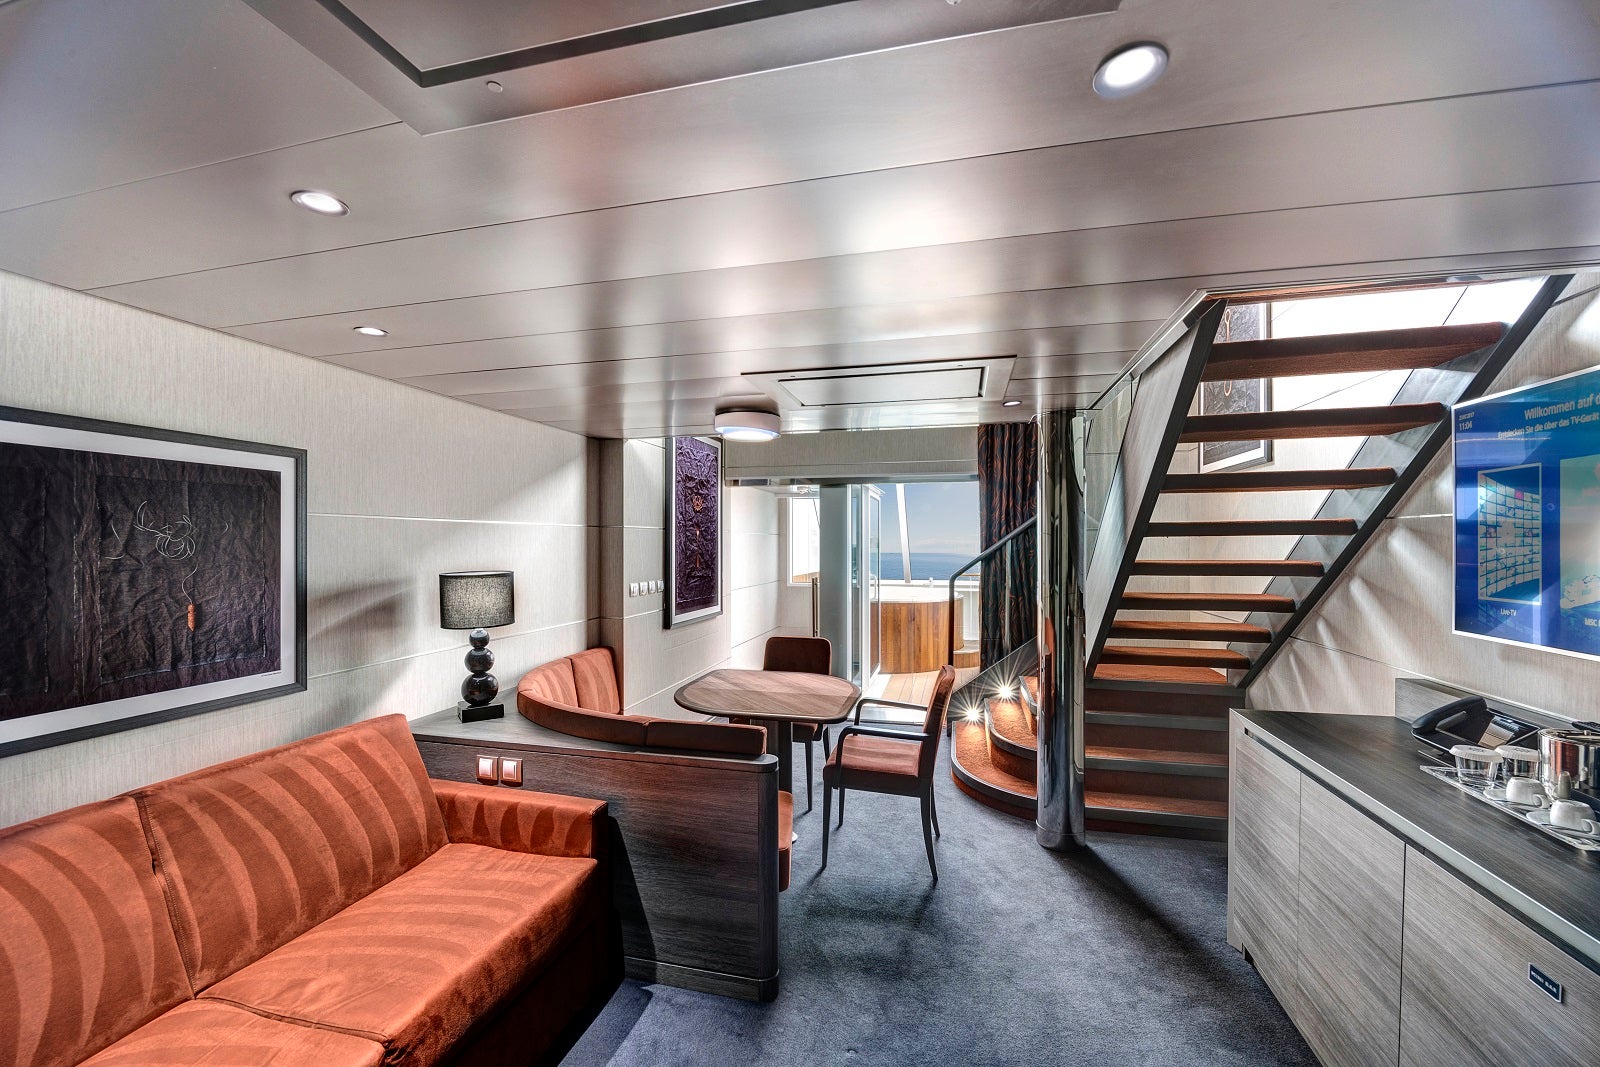 A cruise ship cabin with a sofa, table and chairs, and a set of stairs leading to another level